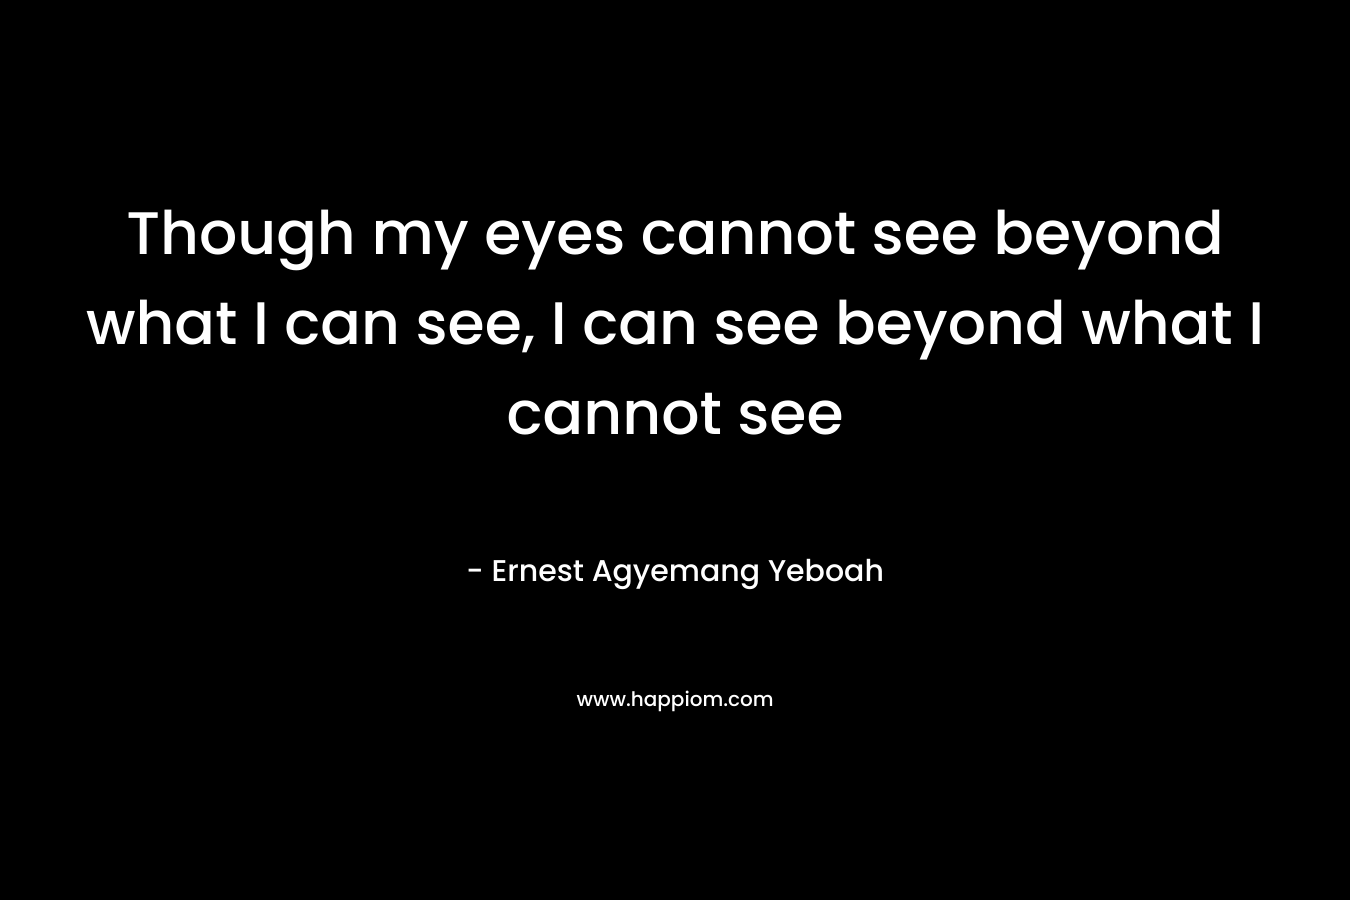 Though my eyes cannot see beyond what I can see, I can see beyond what I cannot see